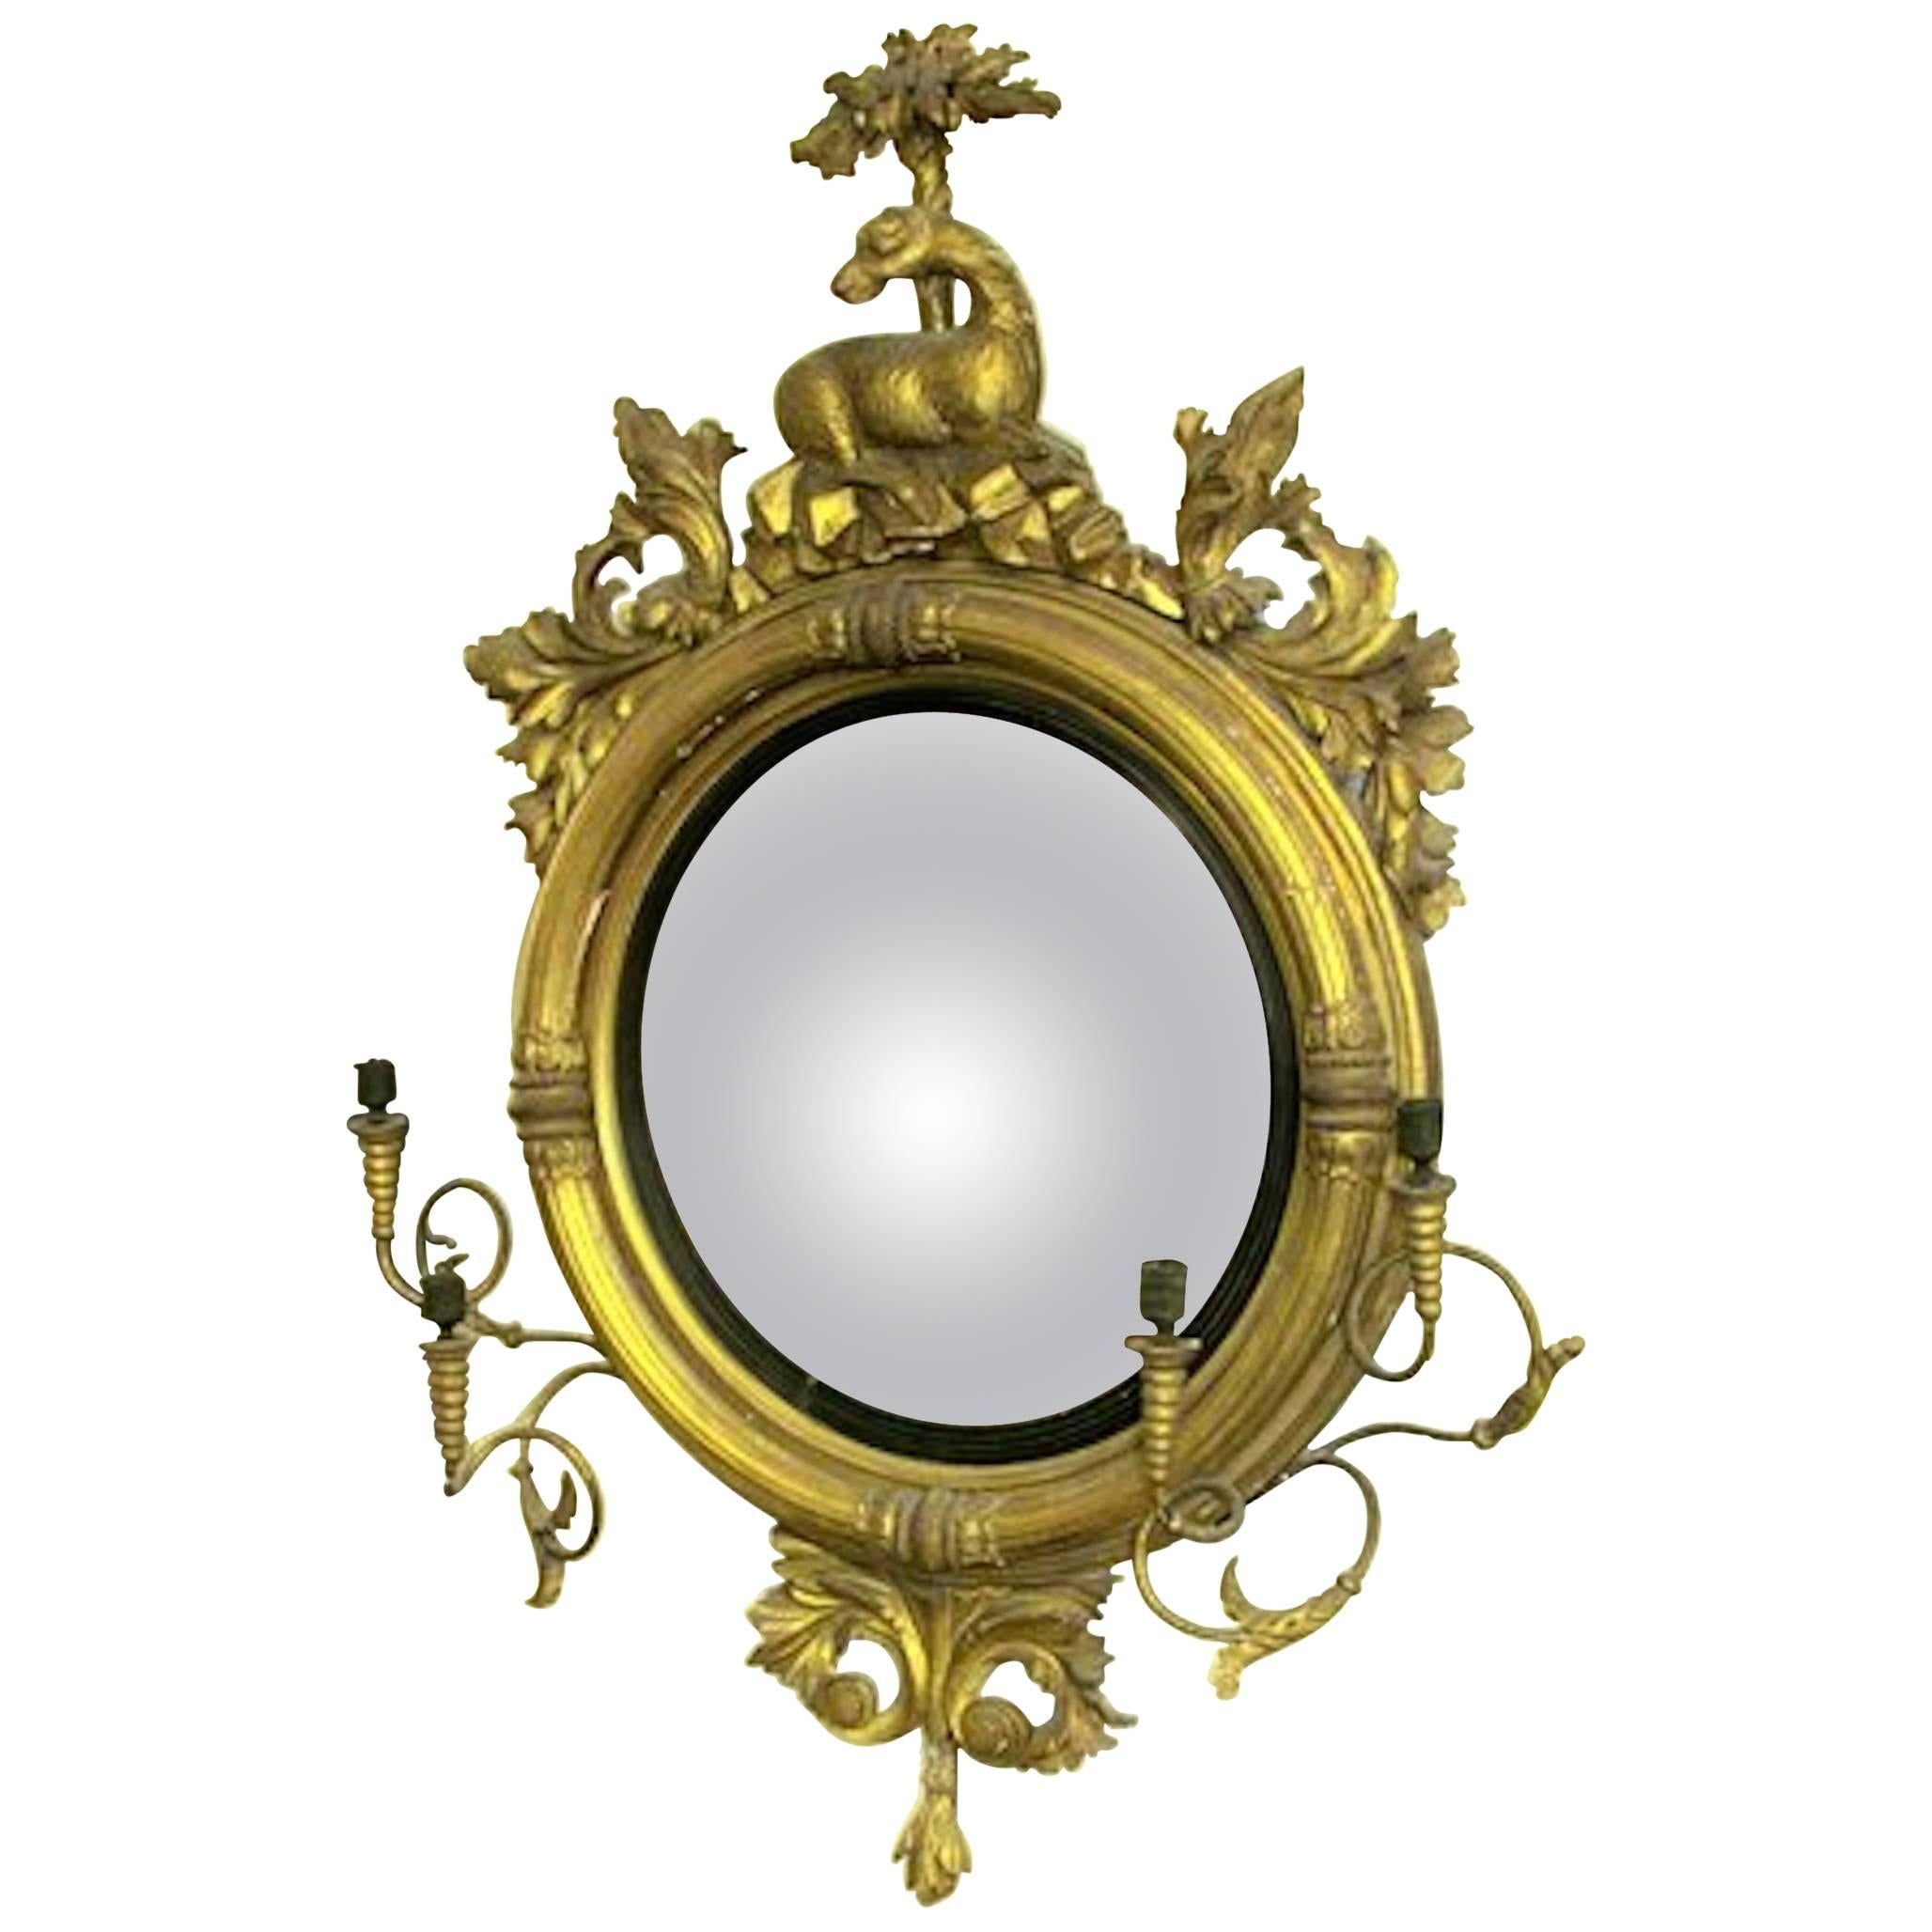 Antique American Federal Giltwood Convex Mirror With Double Sconce Girandole